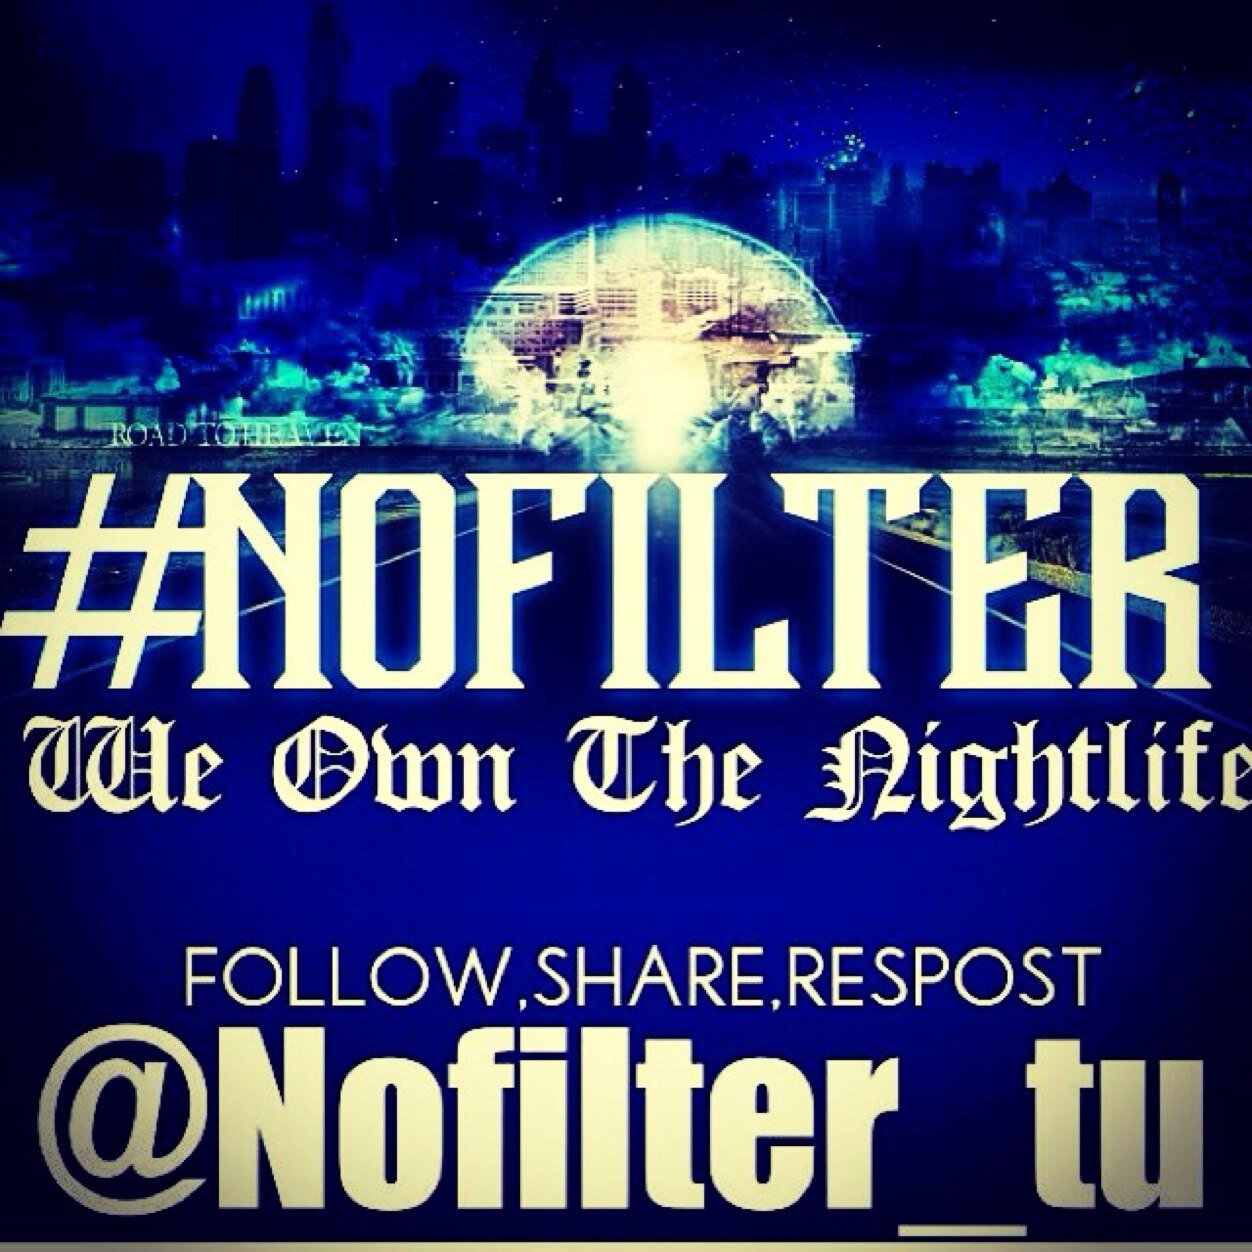 NoFilter Puts the life into life in nightlife specializing in parties & events, come experience one hell of a night. #NoFilter FOLLOW THE MOVEMENT #TempleMade